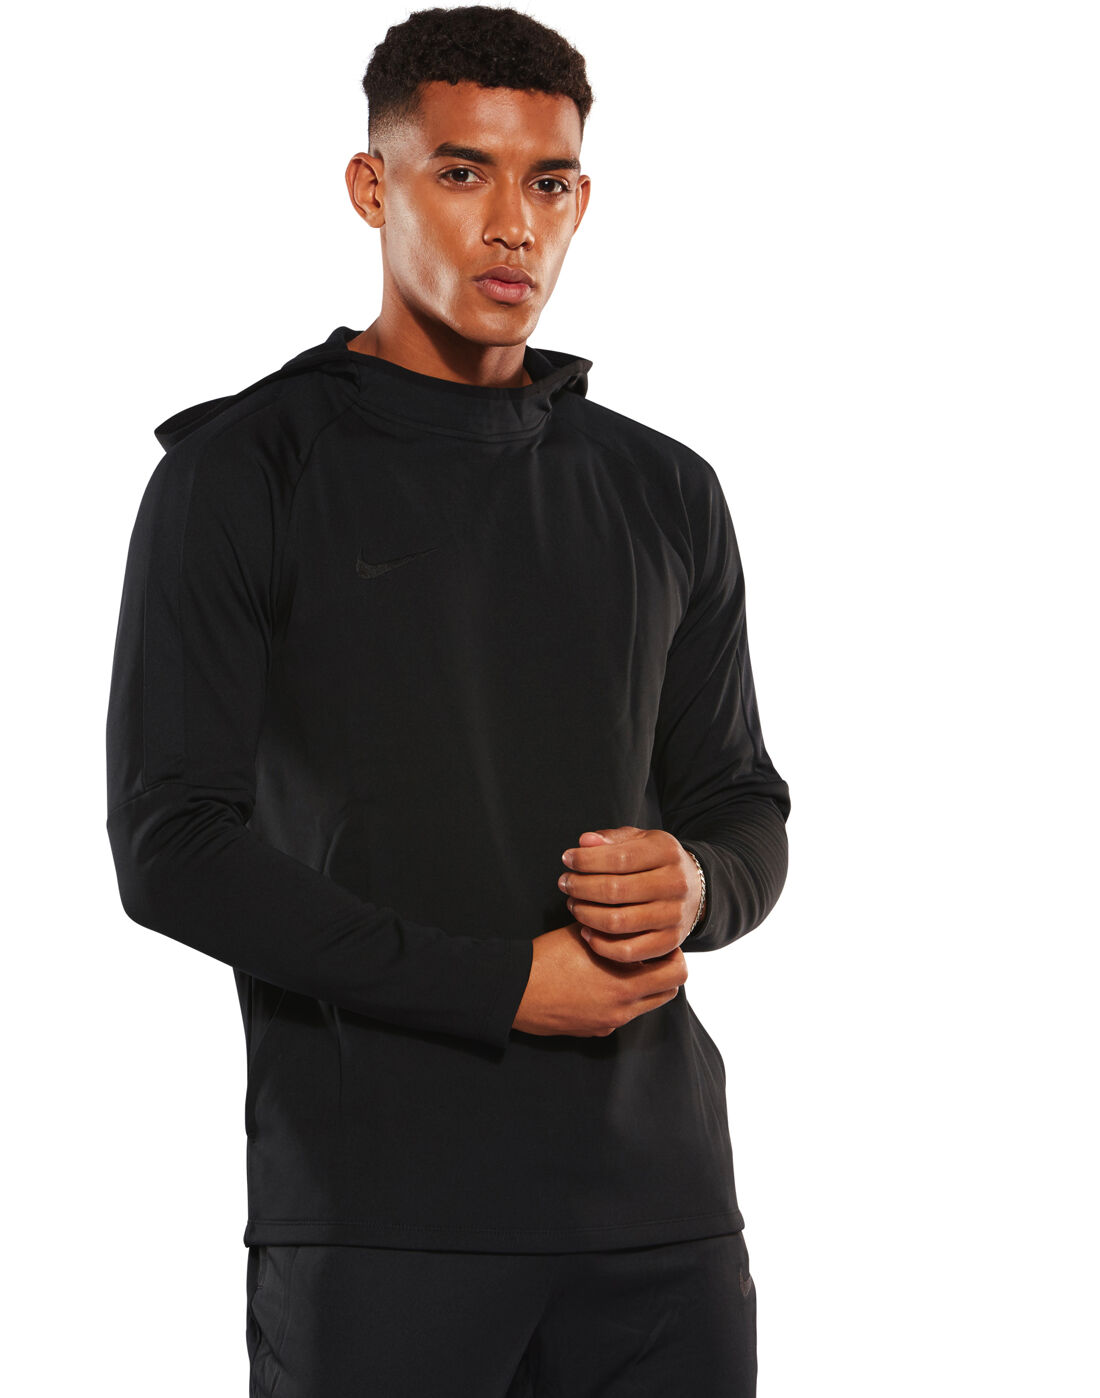 nike academy pullover